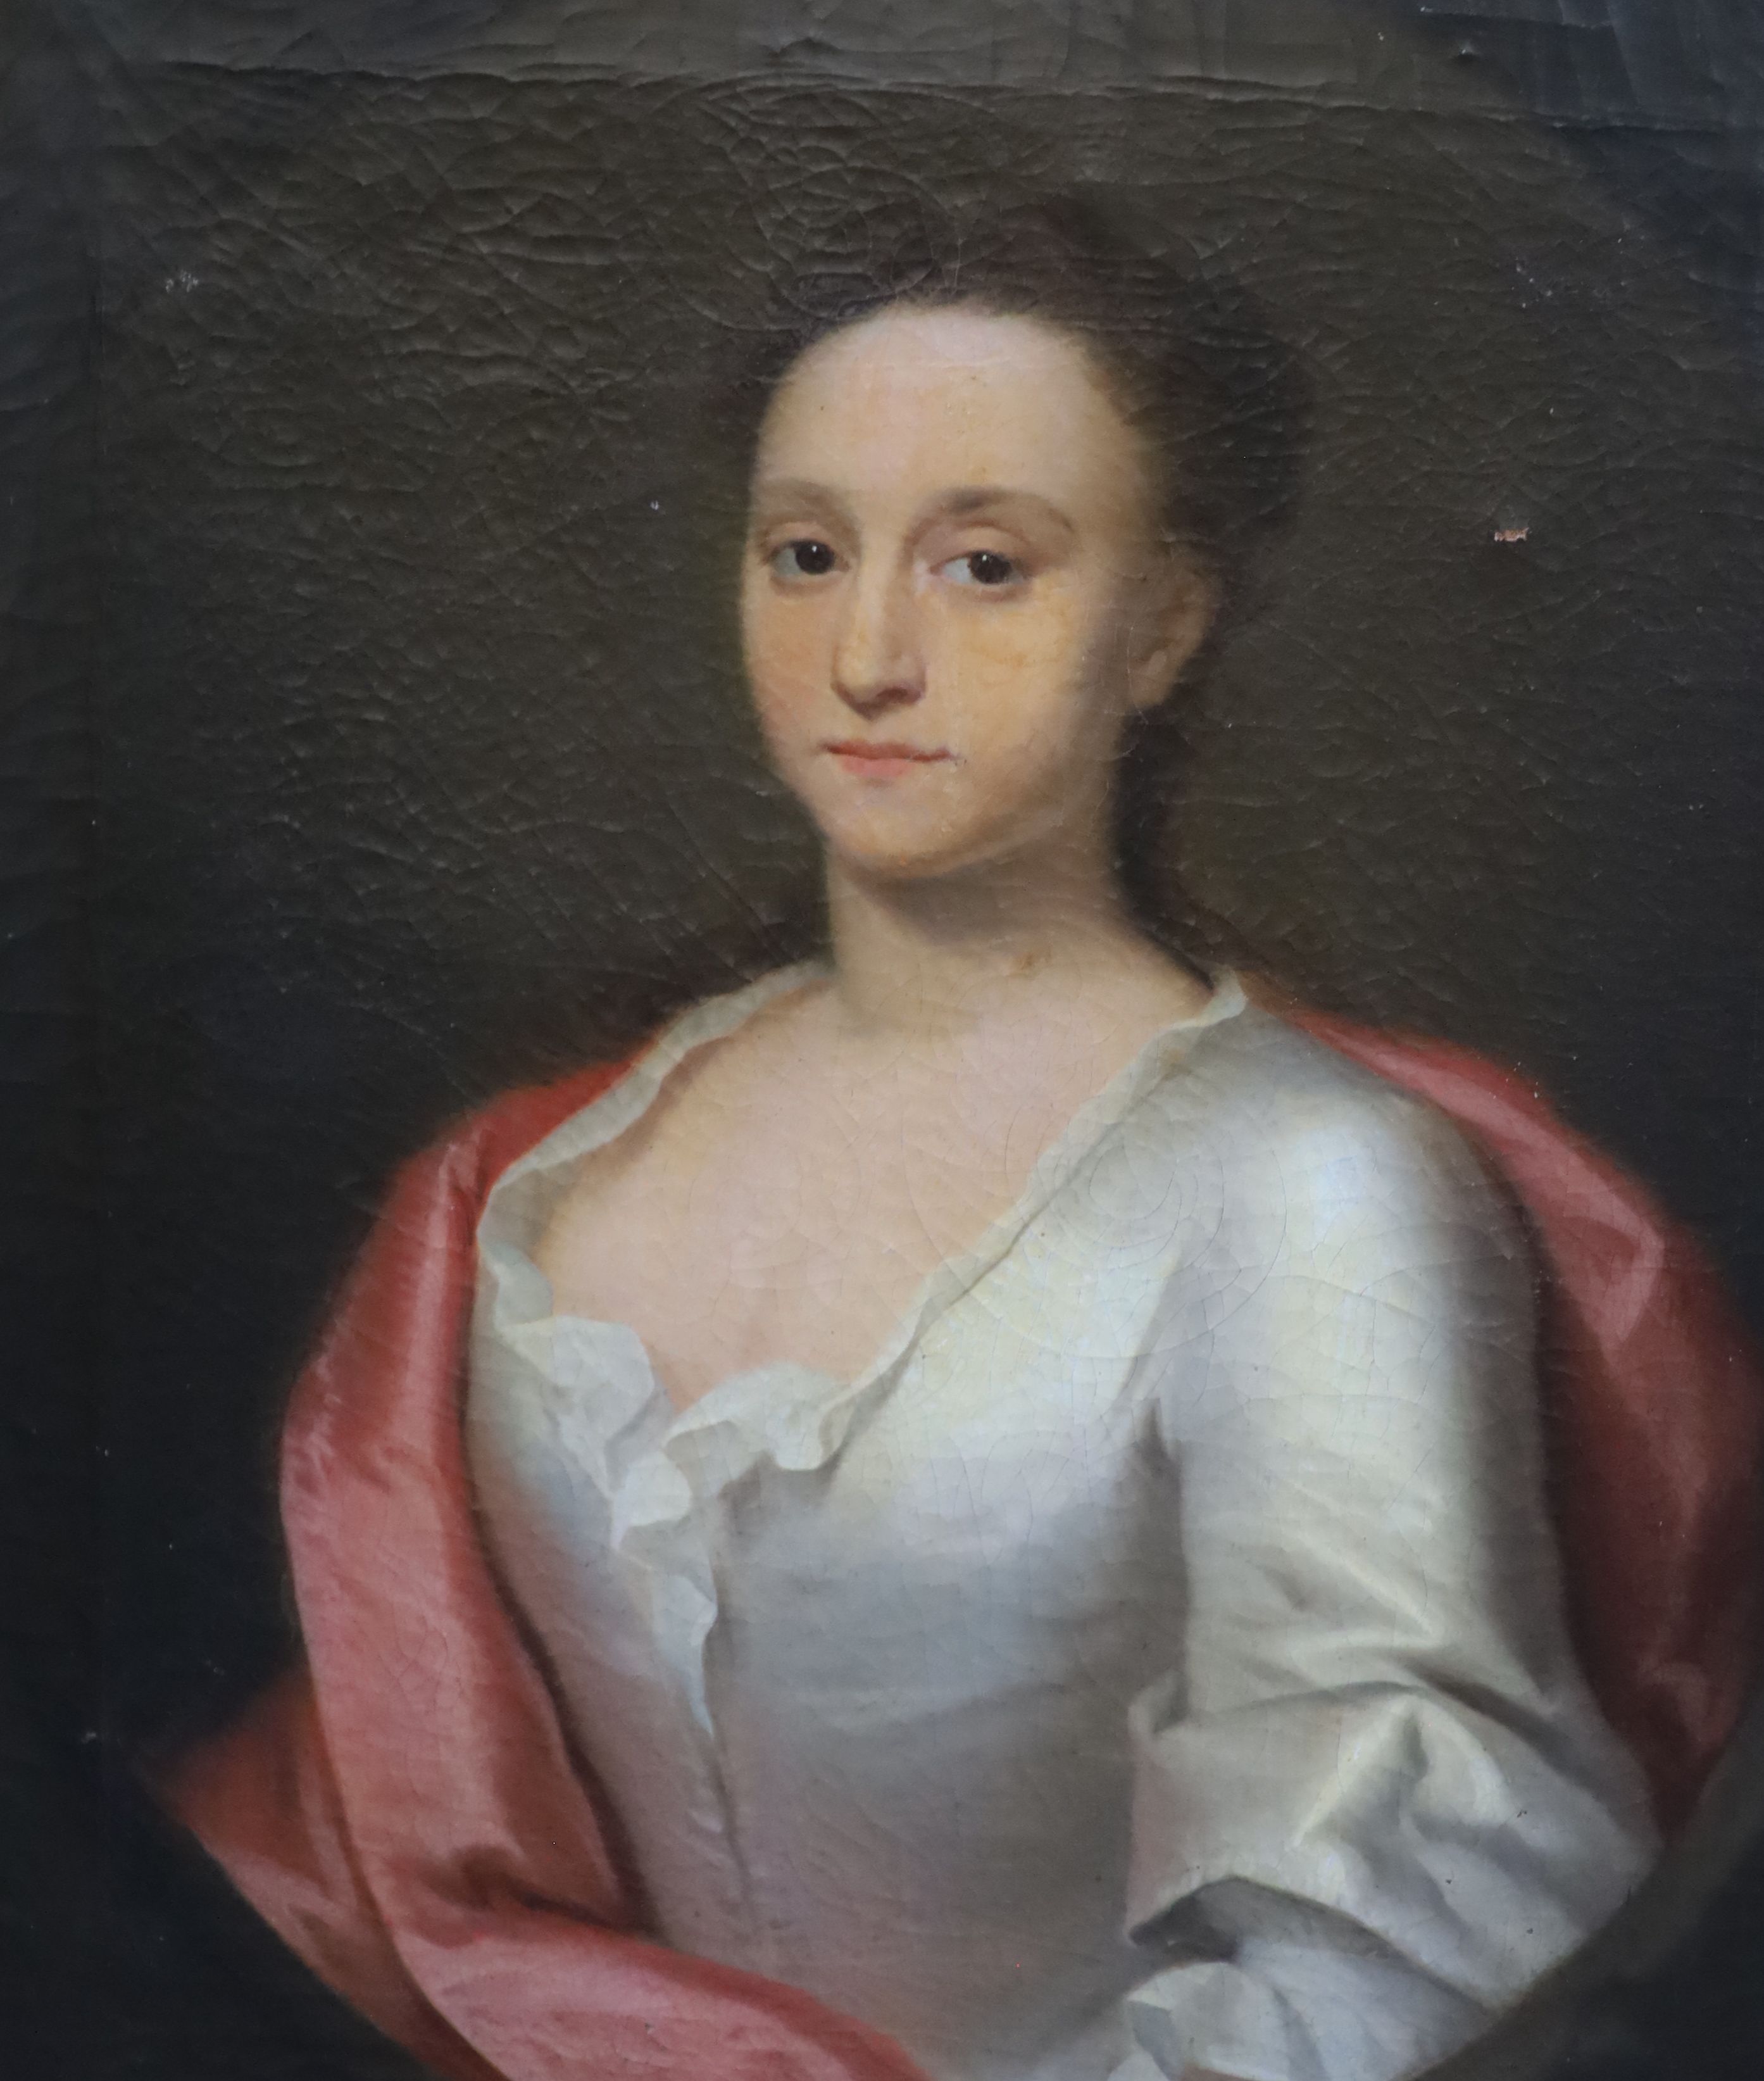 18th century English School, Portrait of a lady wearing a white dress, oil on canvas, 73 x 60 cm.